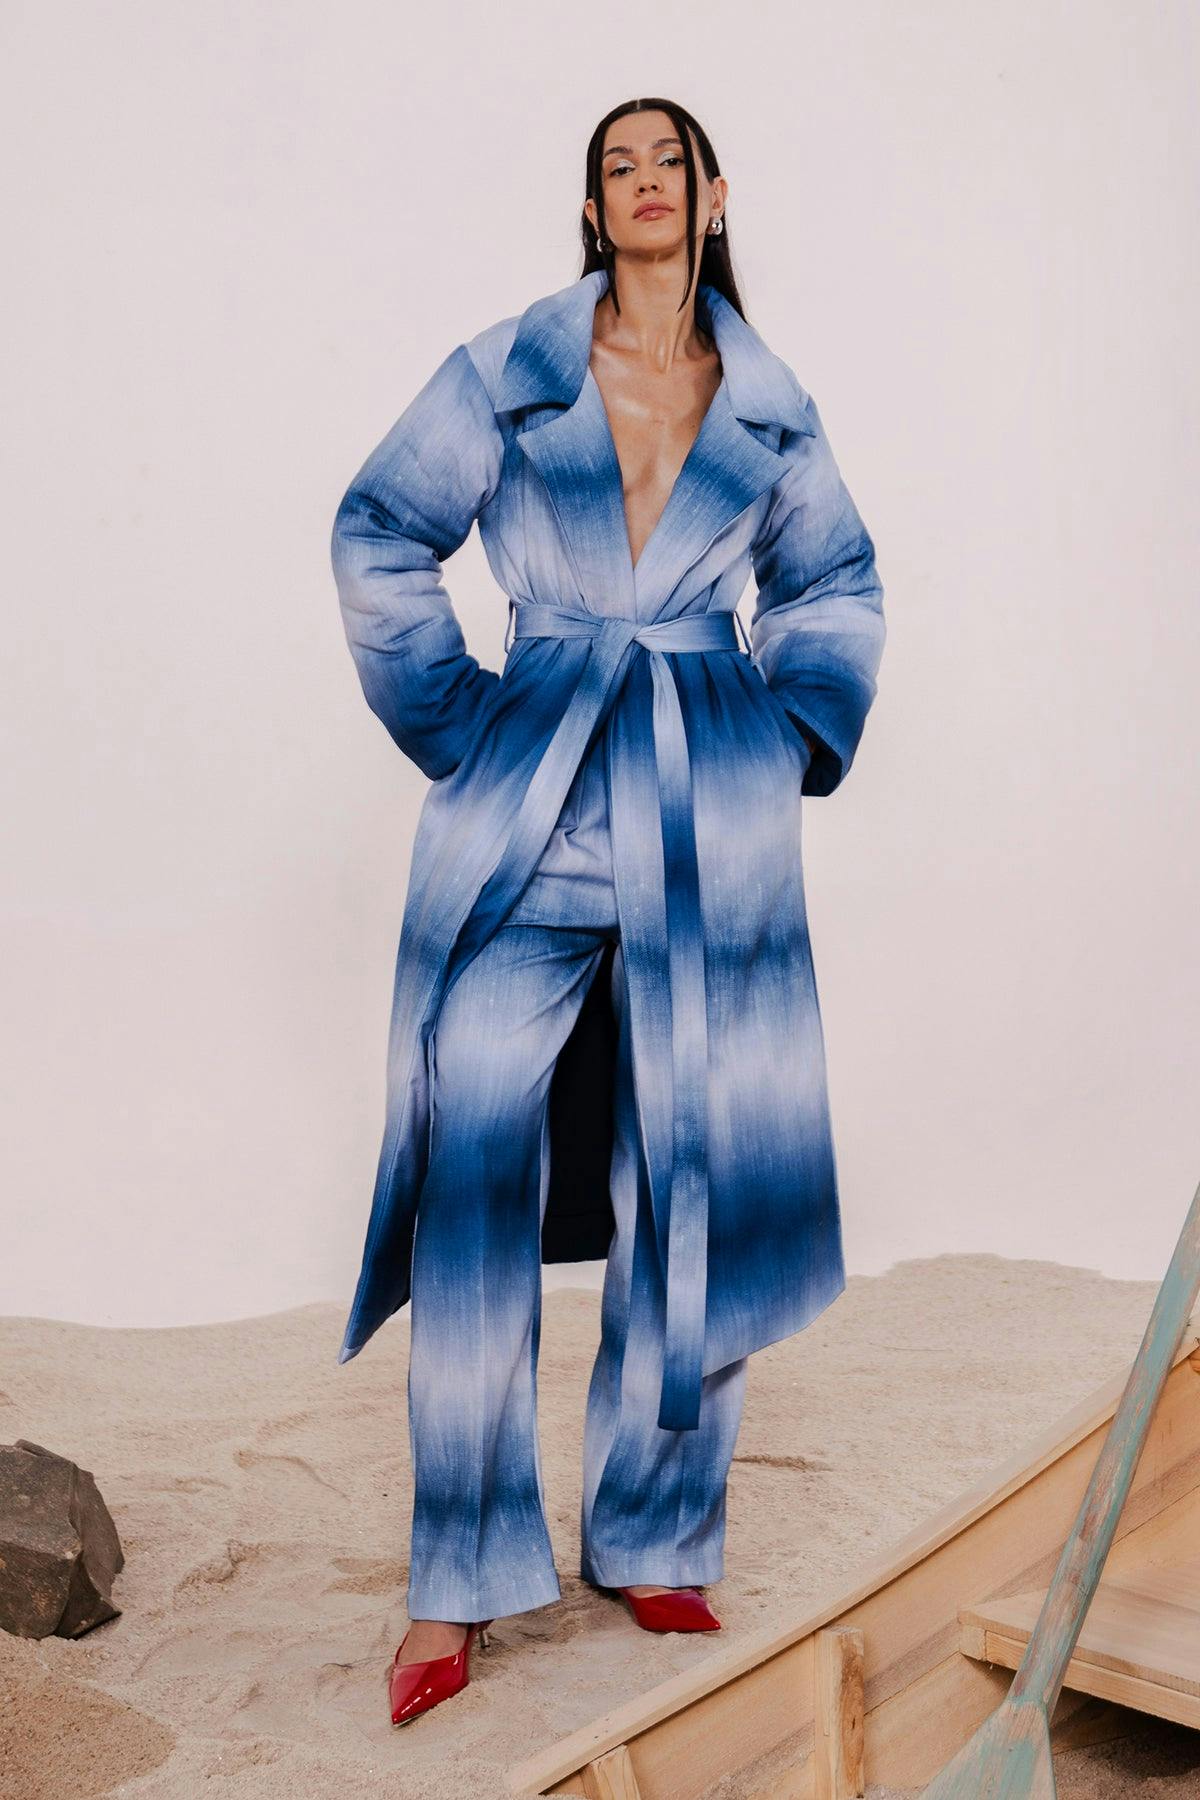 LENNON ICED BLUE LONG PUFFER BLAZER WITH MATCHING PANTS, a product by July Issue